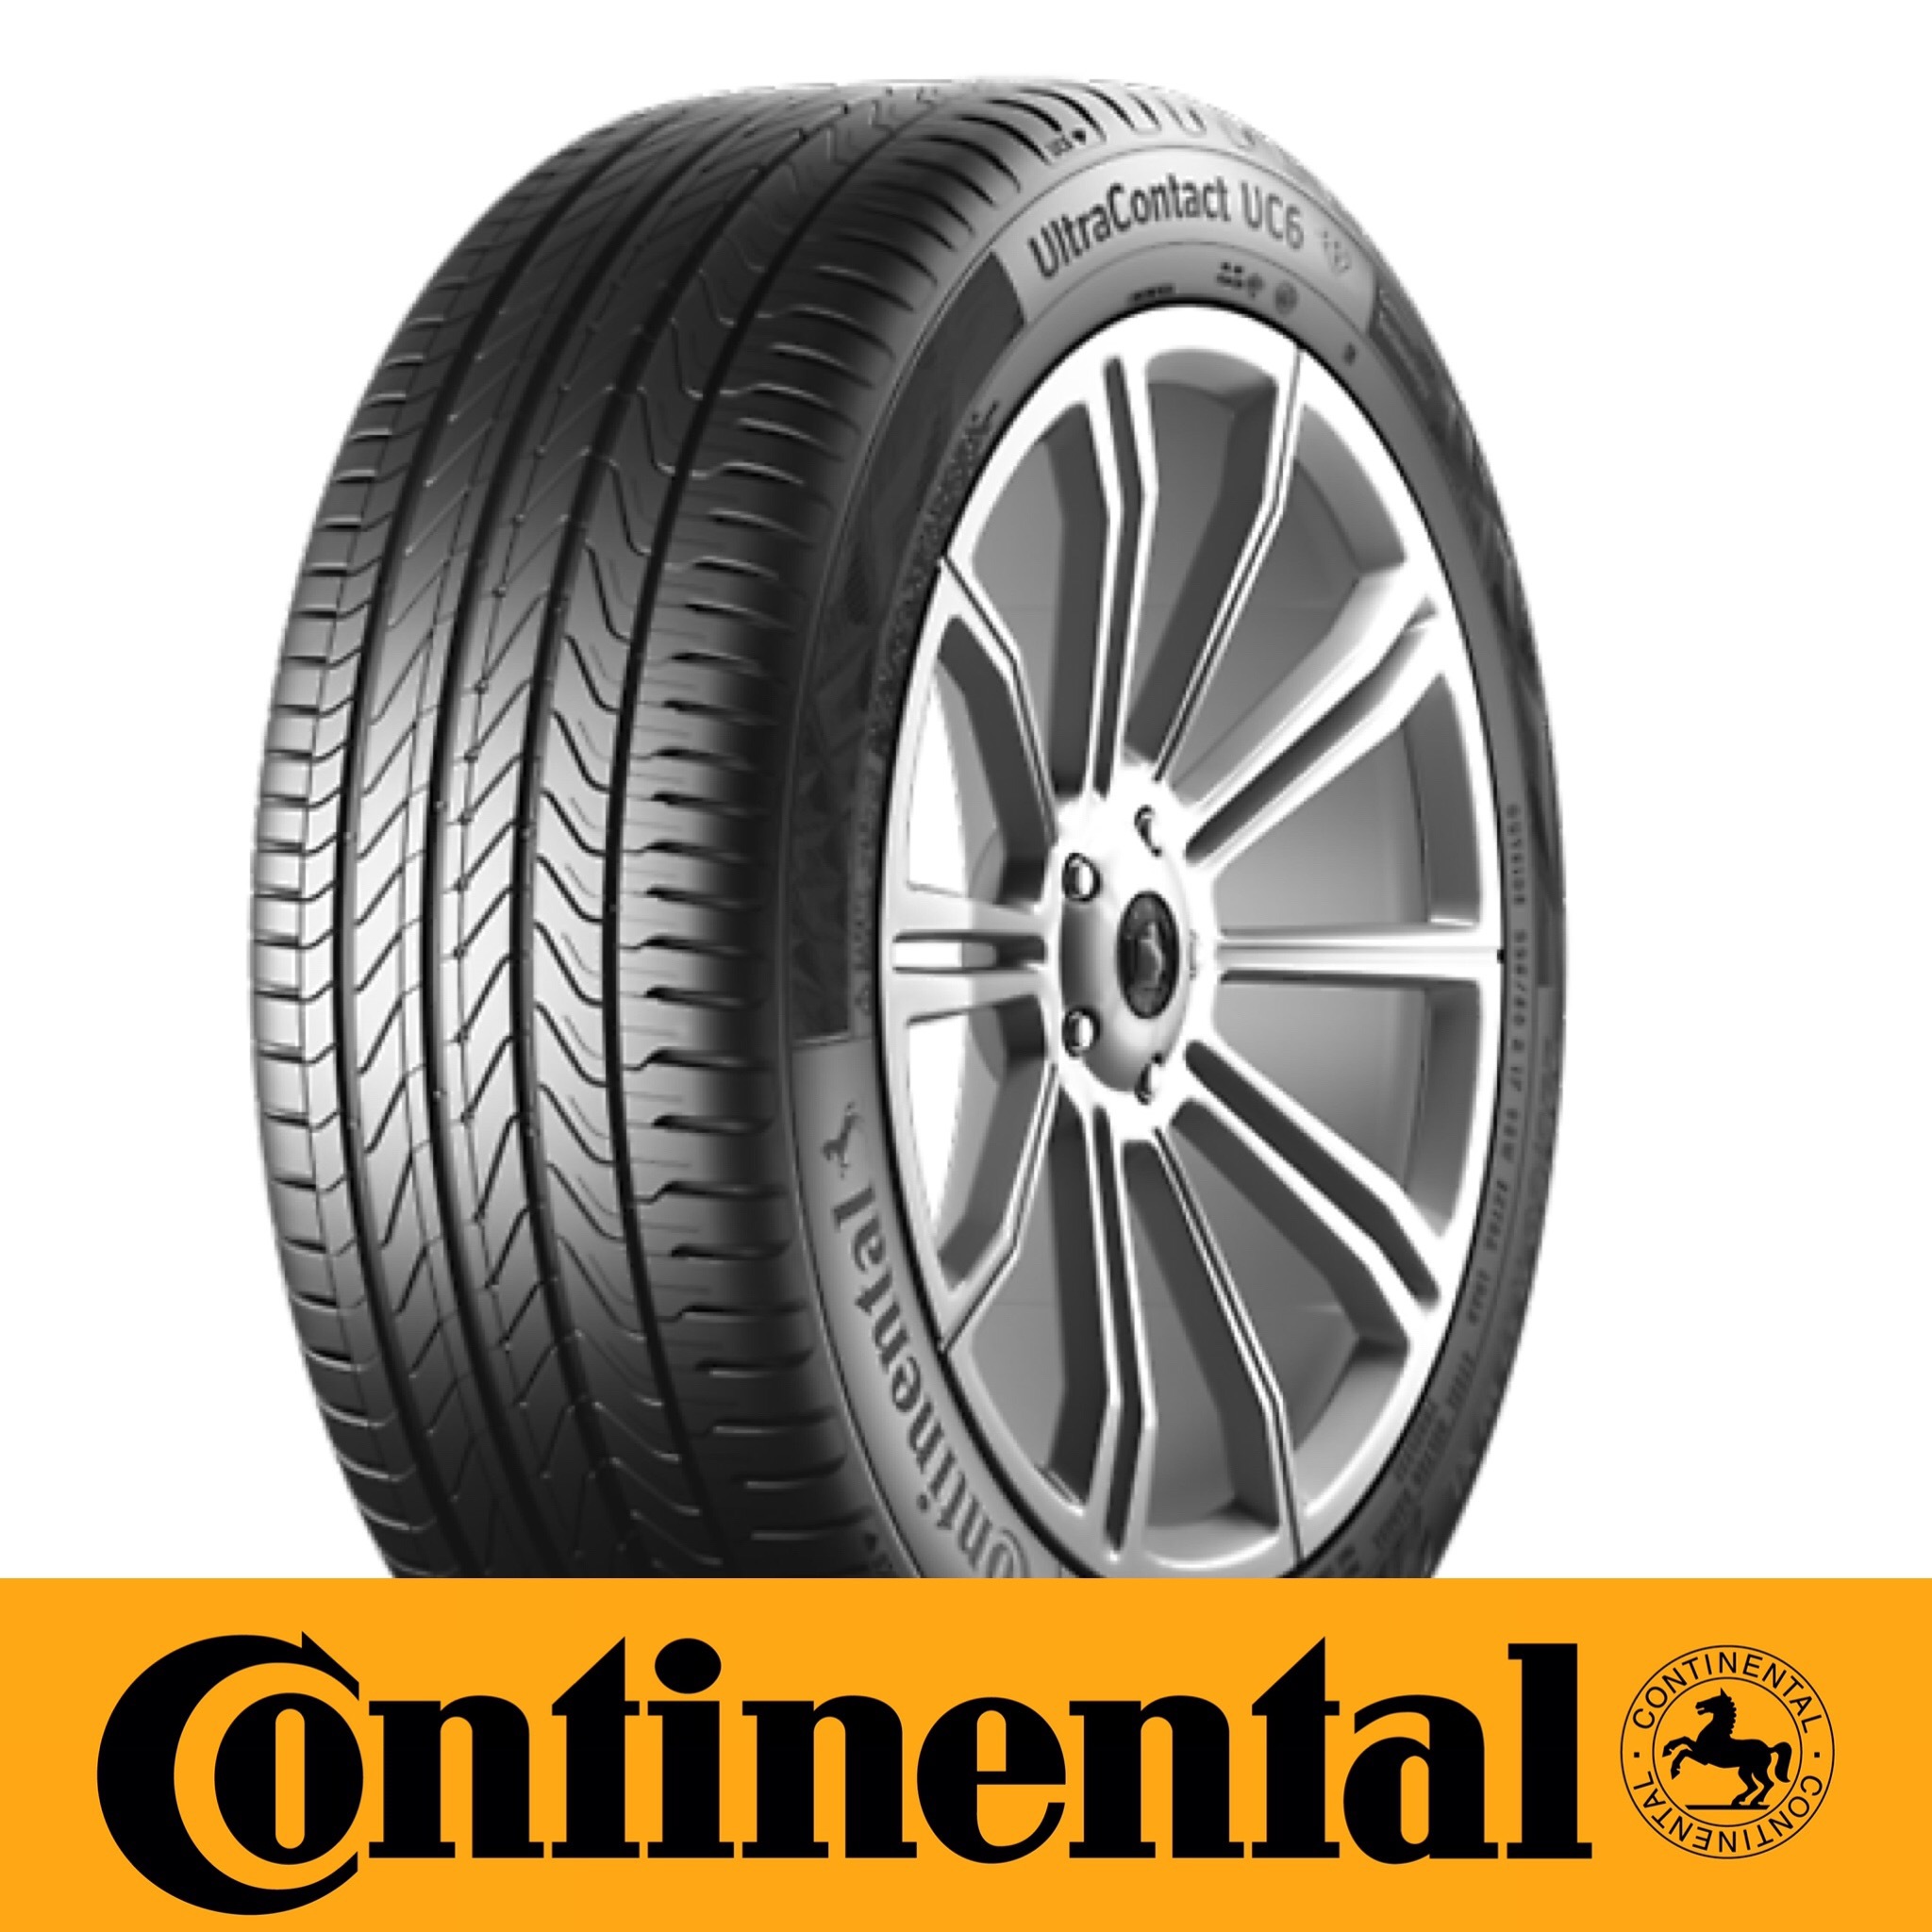 Continental-UltraContact-195-65R15-91T-(b)